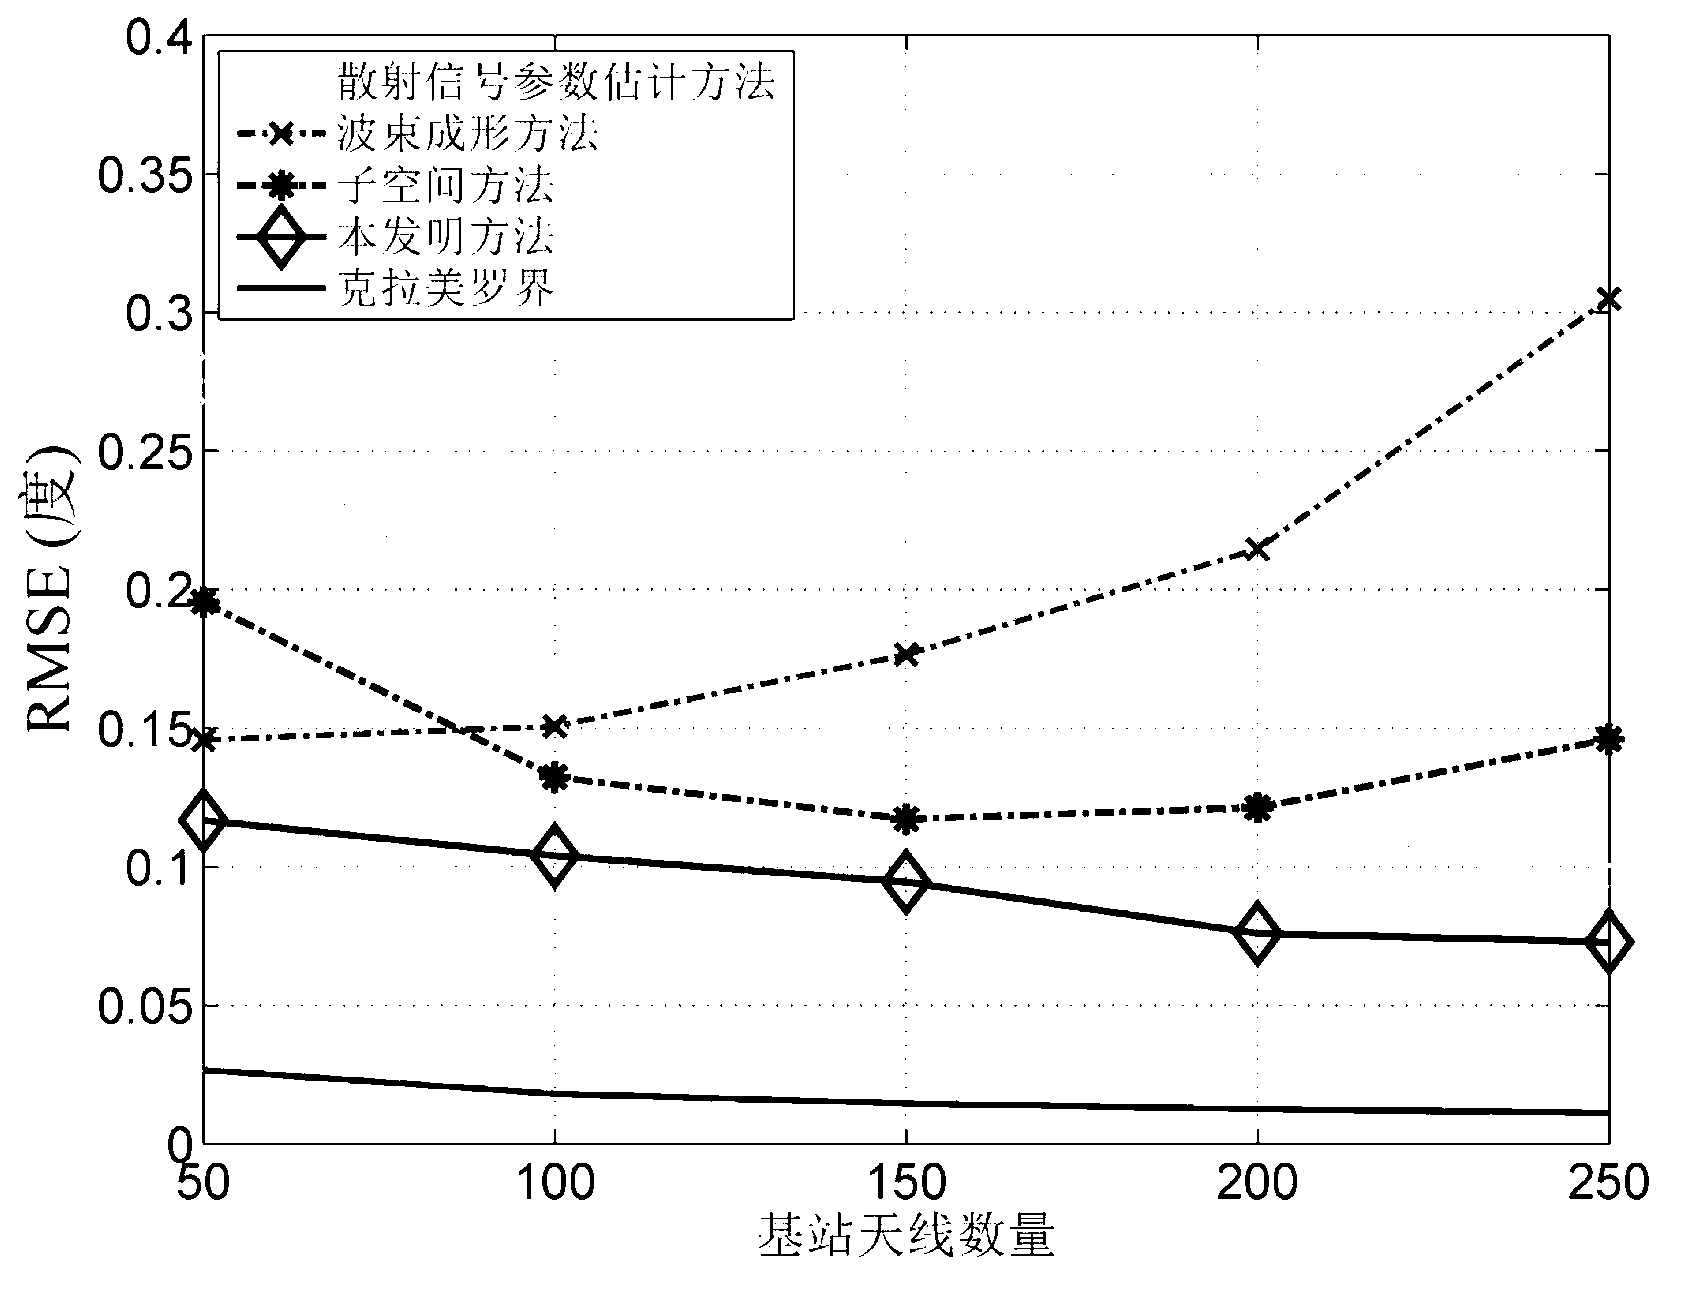 Scattering information source locating method based on distribution matching in large-scale MIMO system